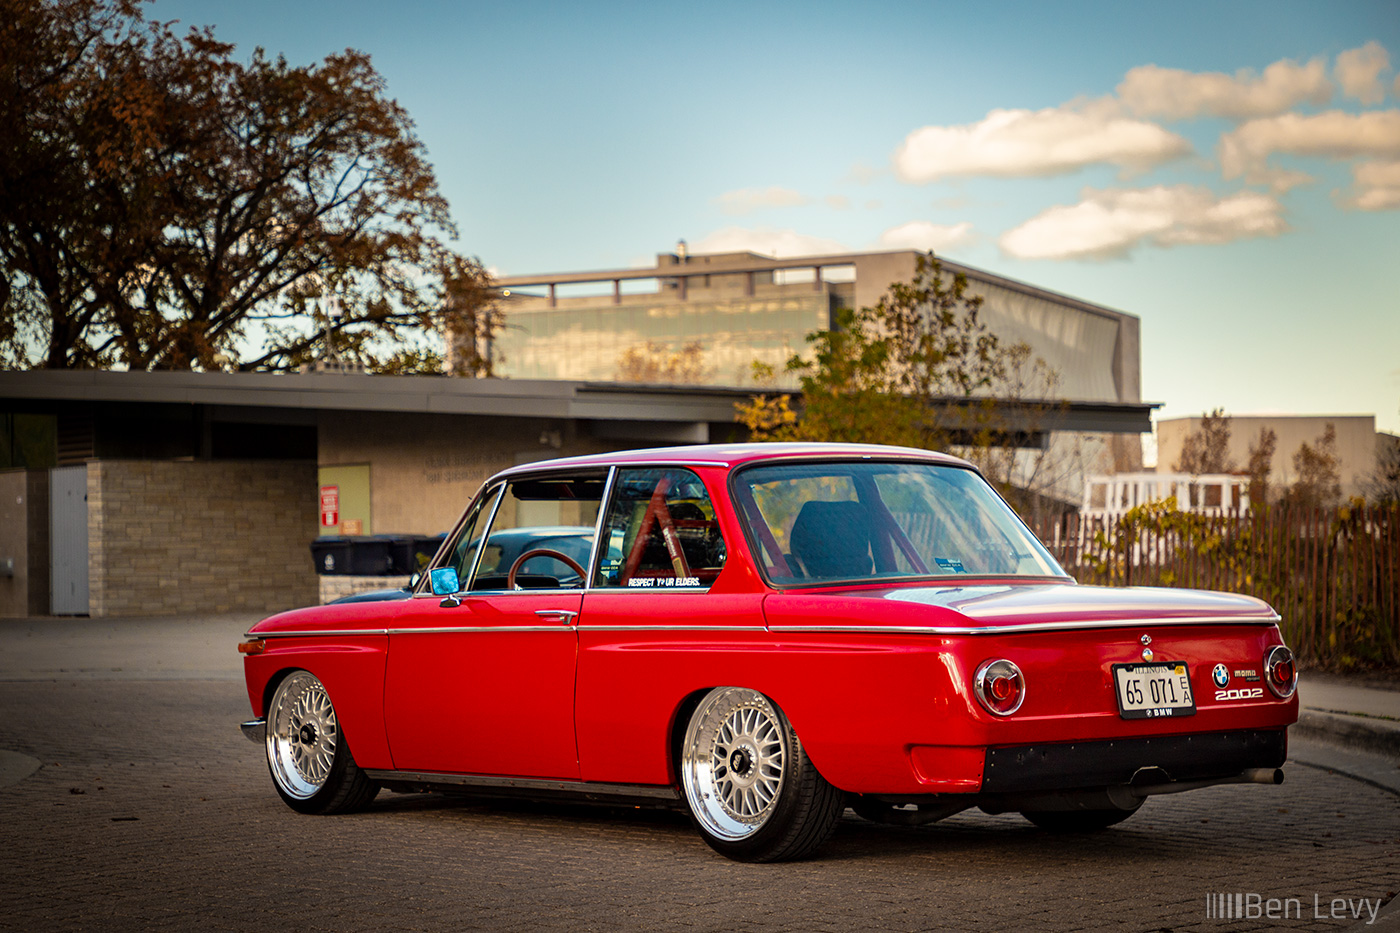 Red BMW 2002 at the Lakeshore in Evanston